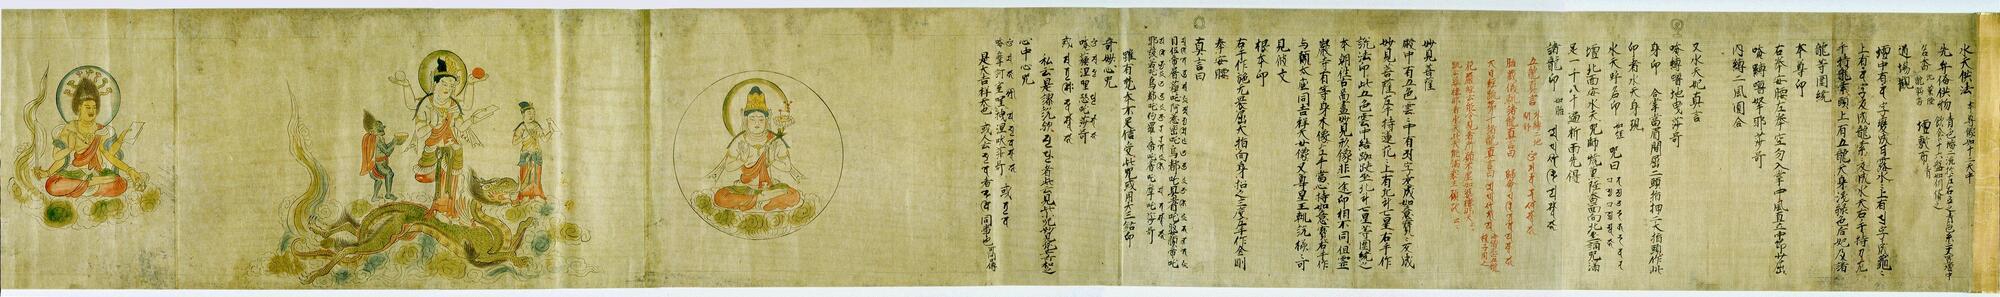 This is a long horizontal scroll with several calligraphic inscriptions on the right portion of the paper. On the left are 3 figural scenes. The one closest to the writing shows a male figure wearing a large headdress seated in the lotus position within a circle. Next there is a figure with four arms who stands on the back of a dragon. Two people stand on either side- one a short blue-skinned man who holds a bowl and the other a smaller figure who holds a brush and paper. The third scene shows a male figure, seated in the lotus position, who holds a sword, a wheel, a brush and paper in his four hands.